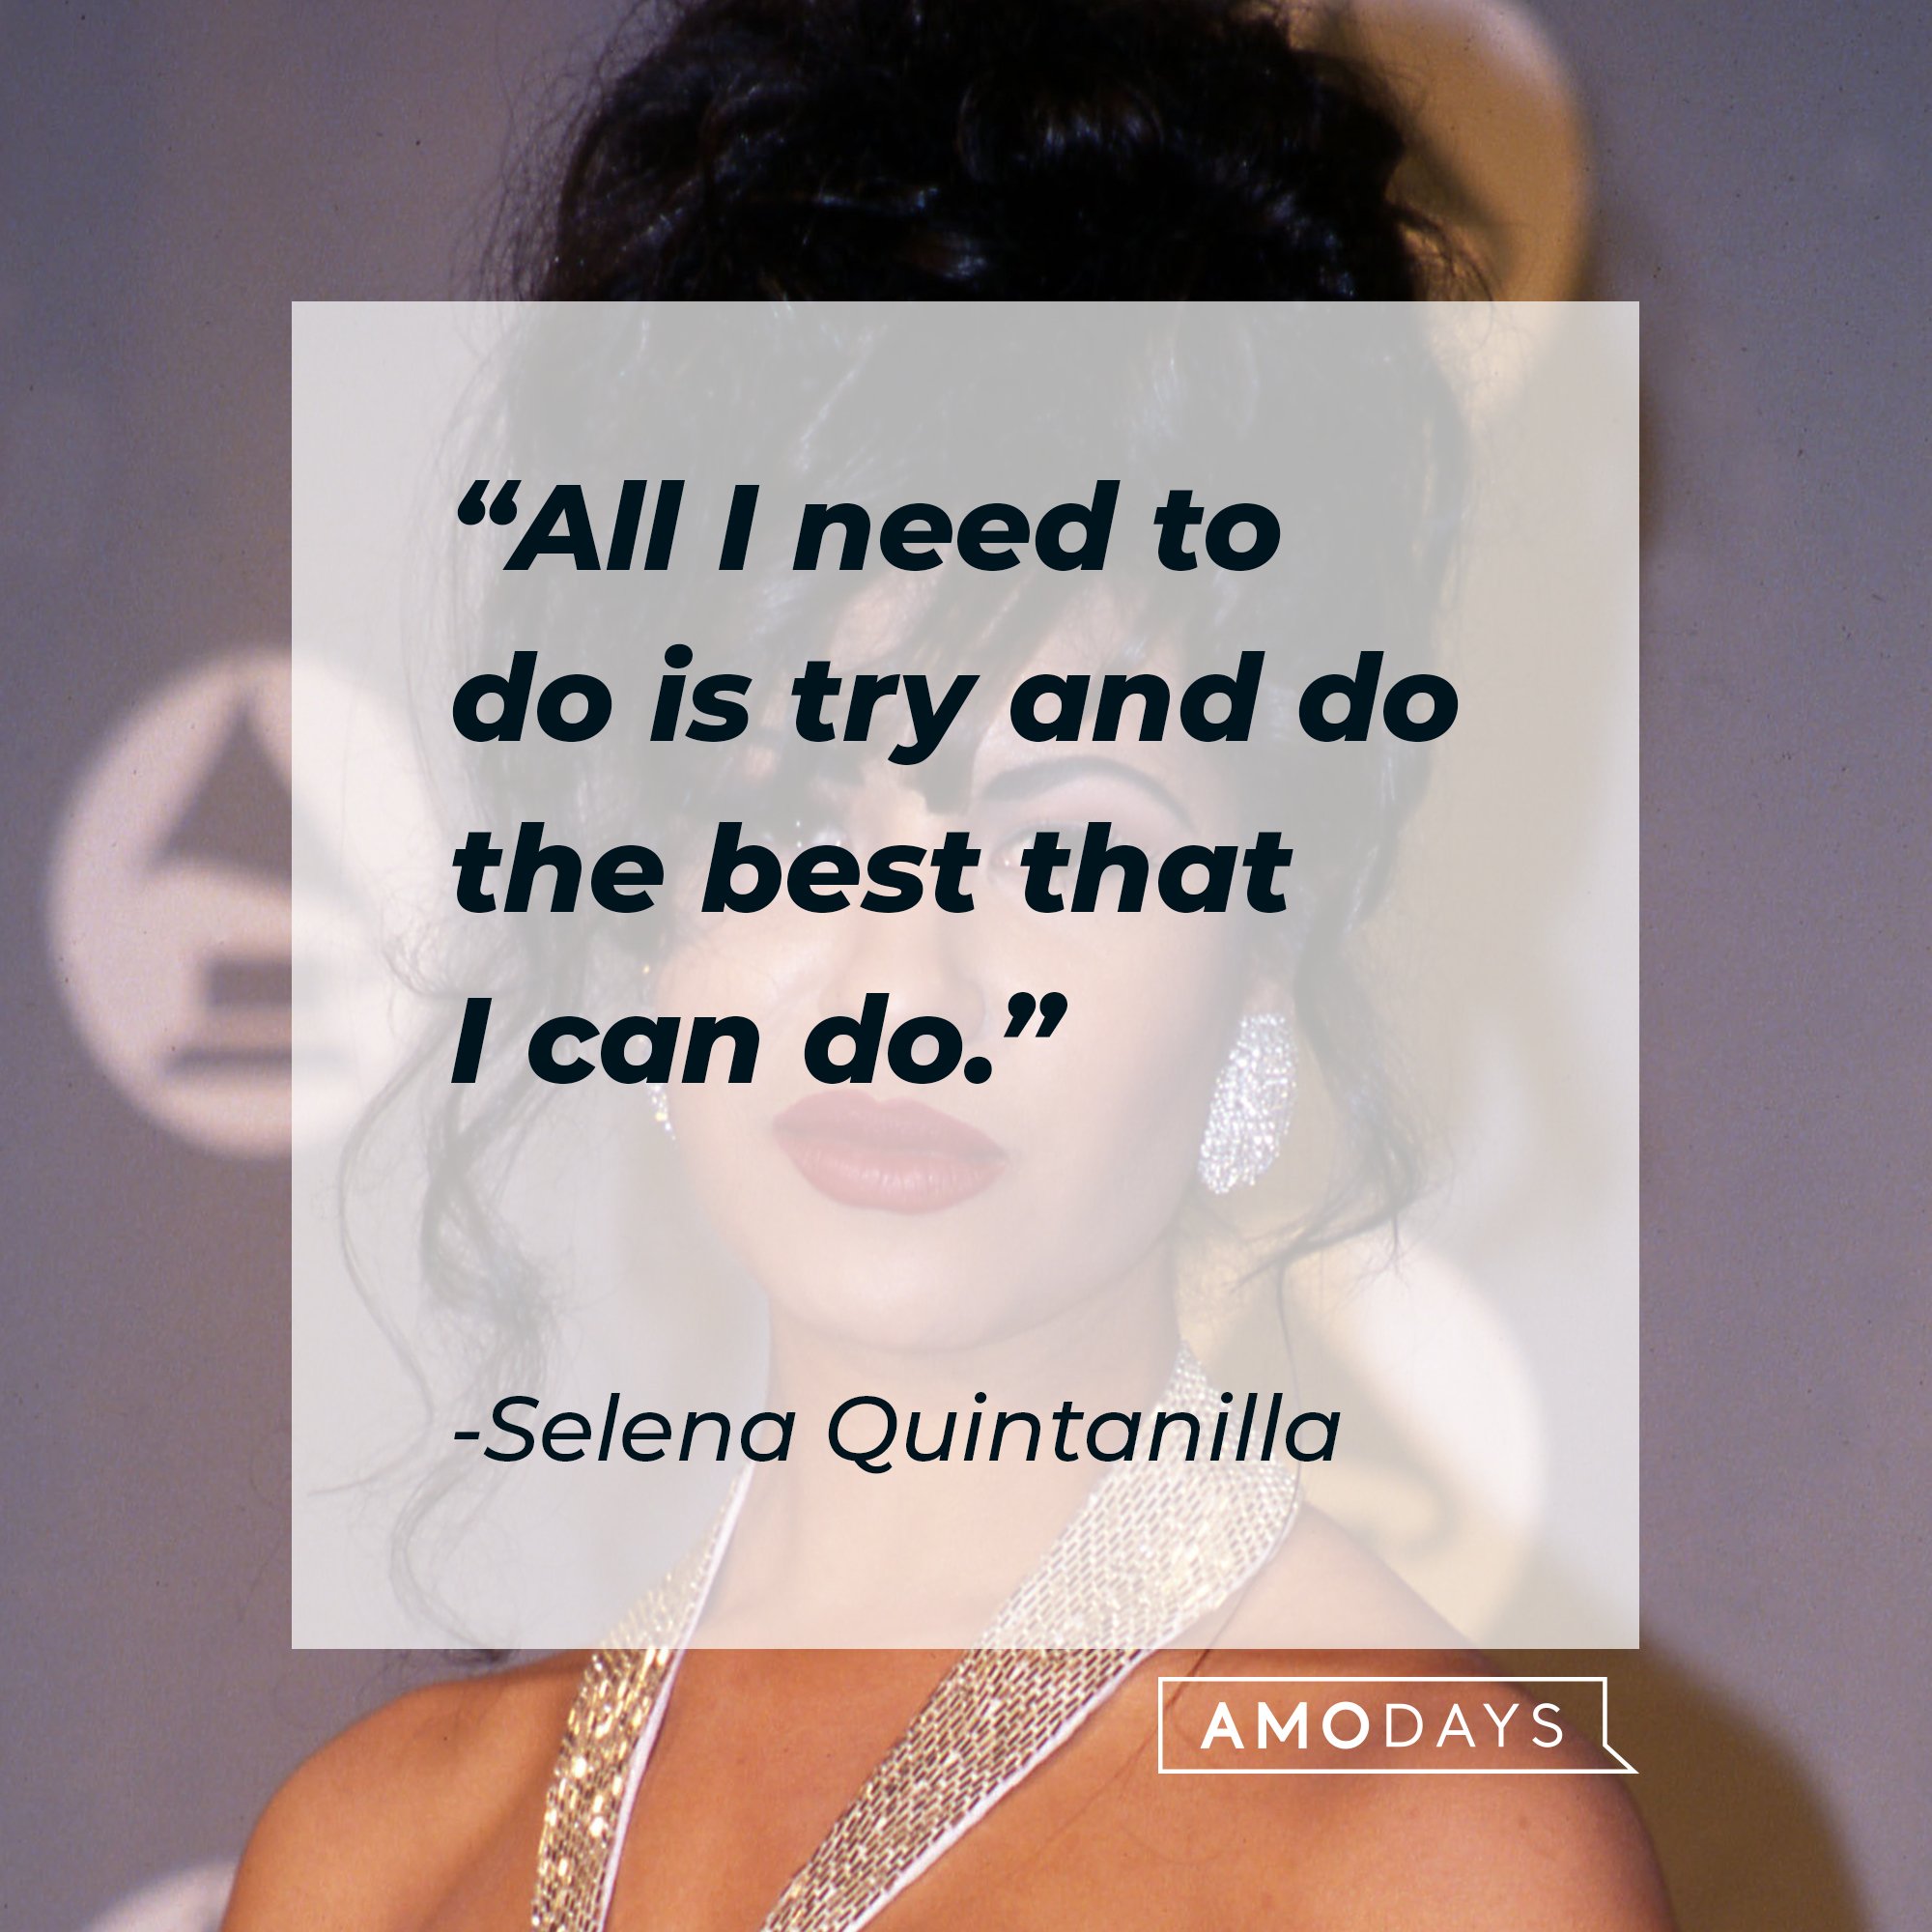 Selena Quintanilla's quote: "All I need to do is try and do the best that I can do." | Image: AmoDays